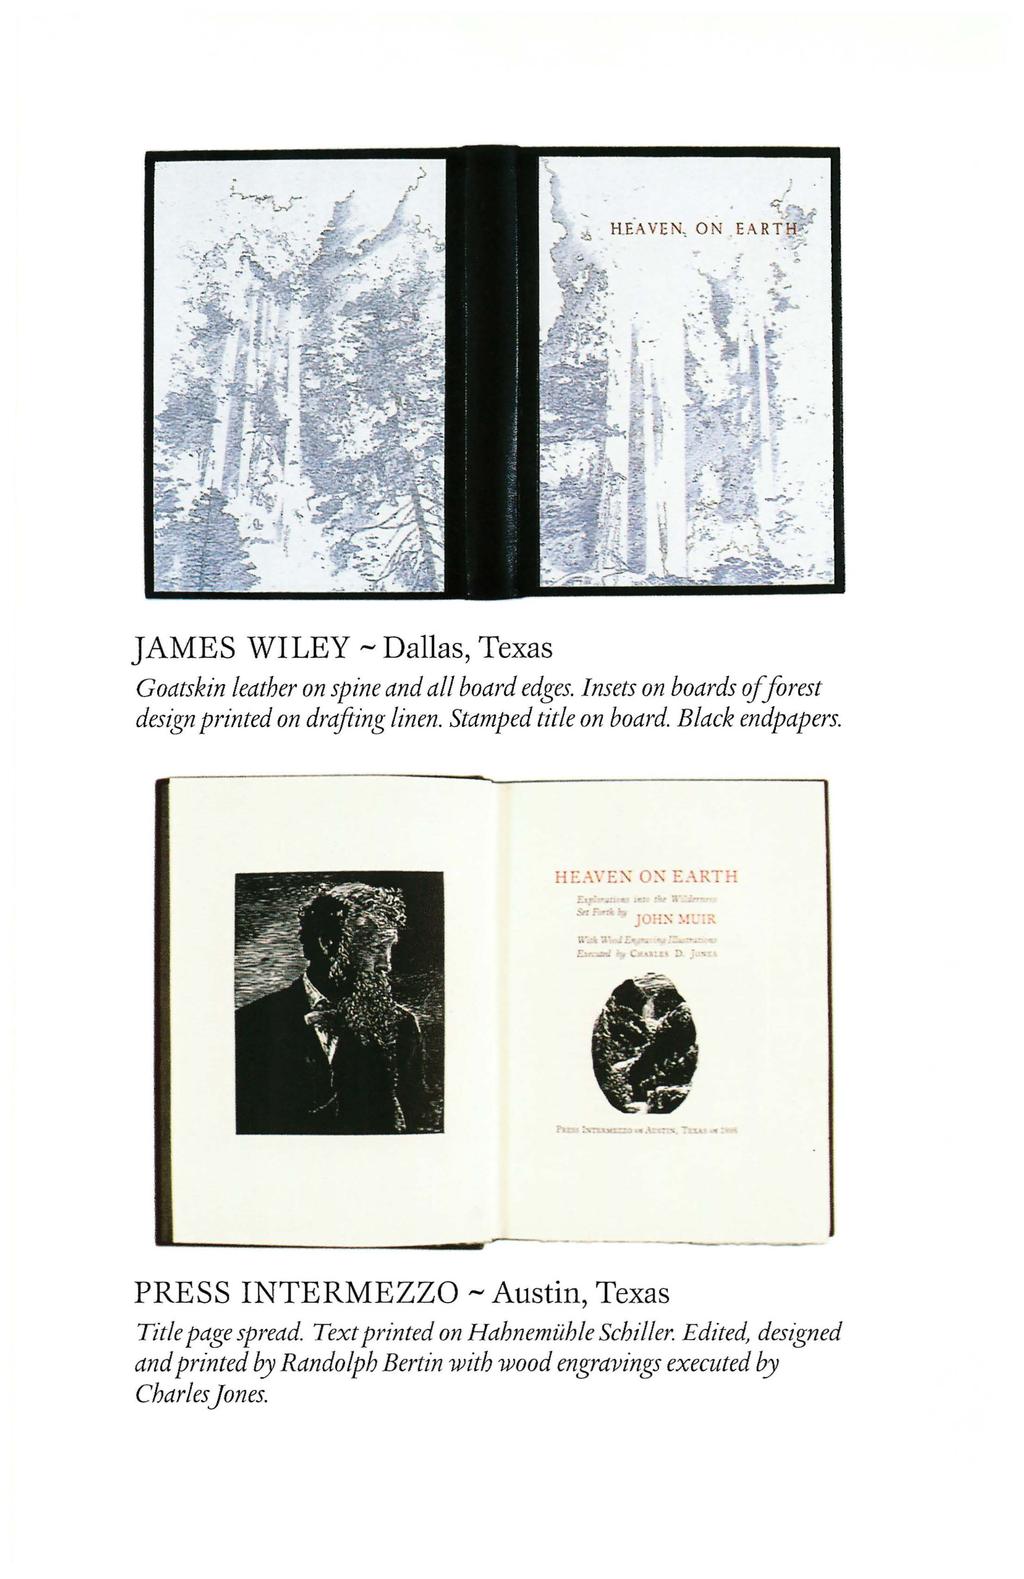 JAMES WILEY - Dallas, Texas Goatskin leather on spine and all board edges. Insets on boards of forest design printed on drafting linen. Stamped title on board. Black endpapers. I -... - "l.